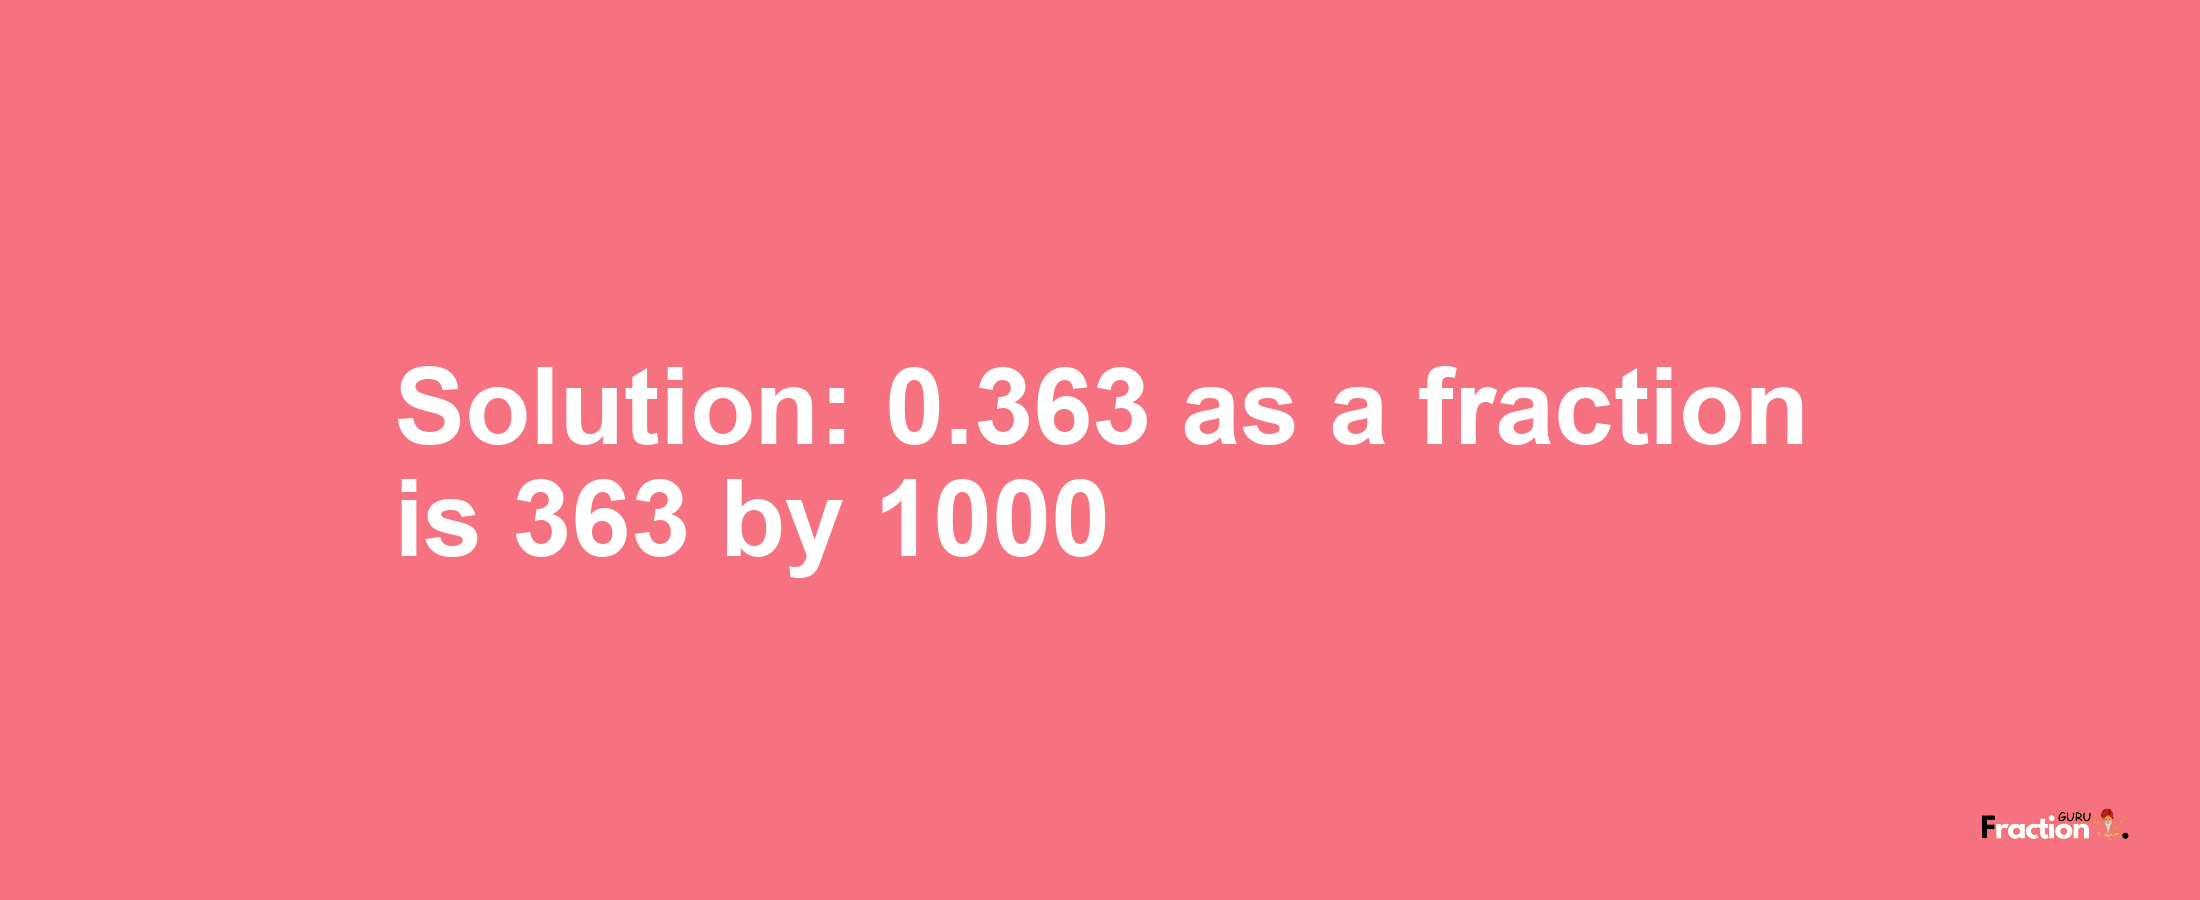 Solution:0.363 as a fraction is 363/1000